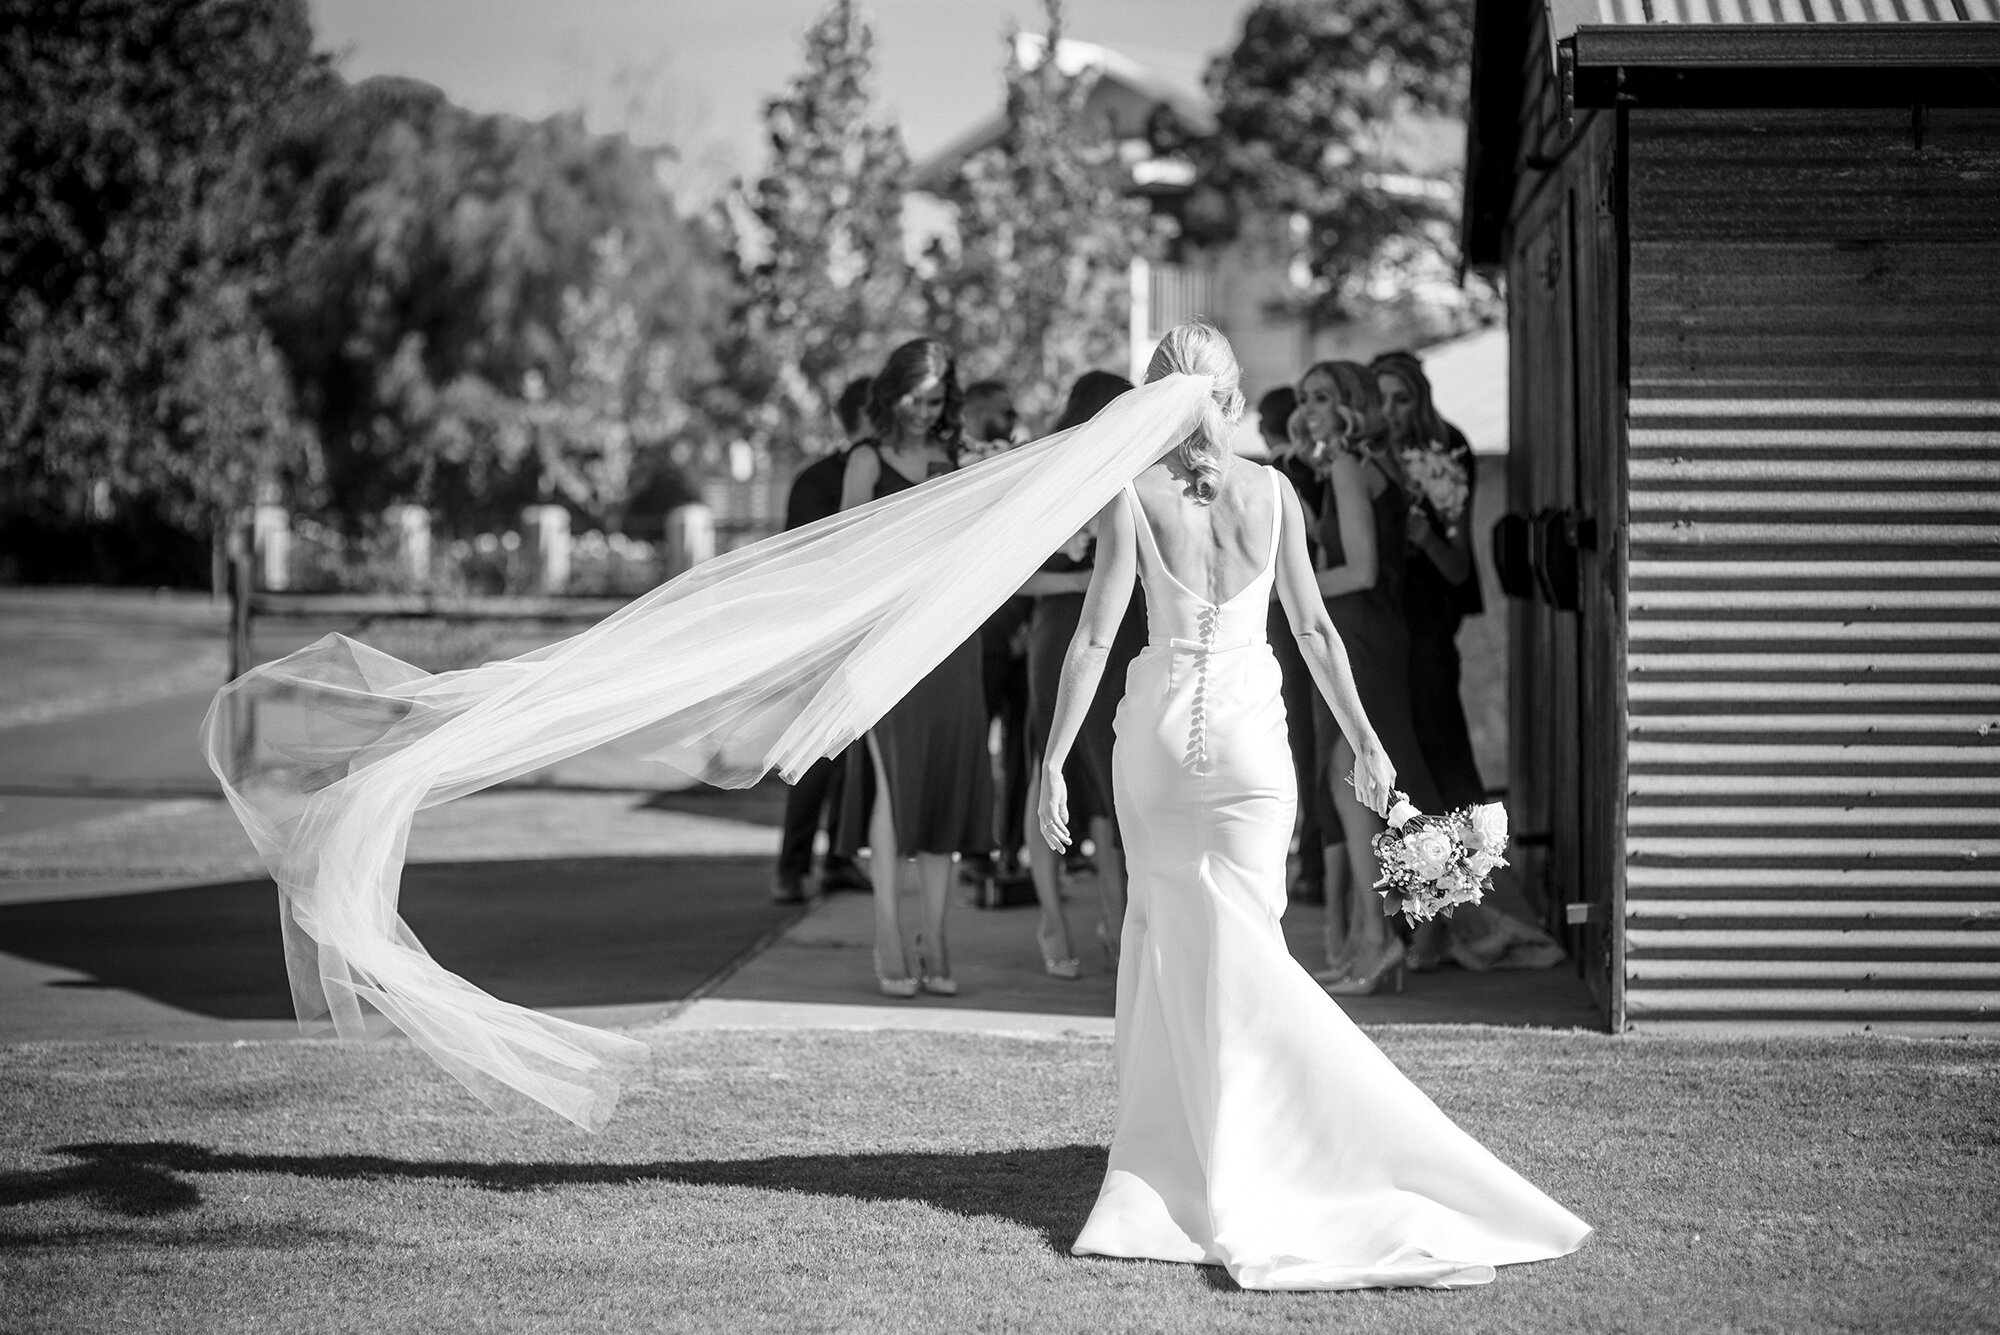 Candid wedding photography Old Broadwater Farm